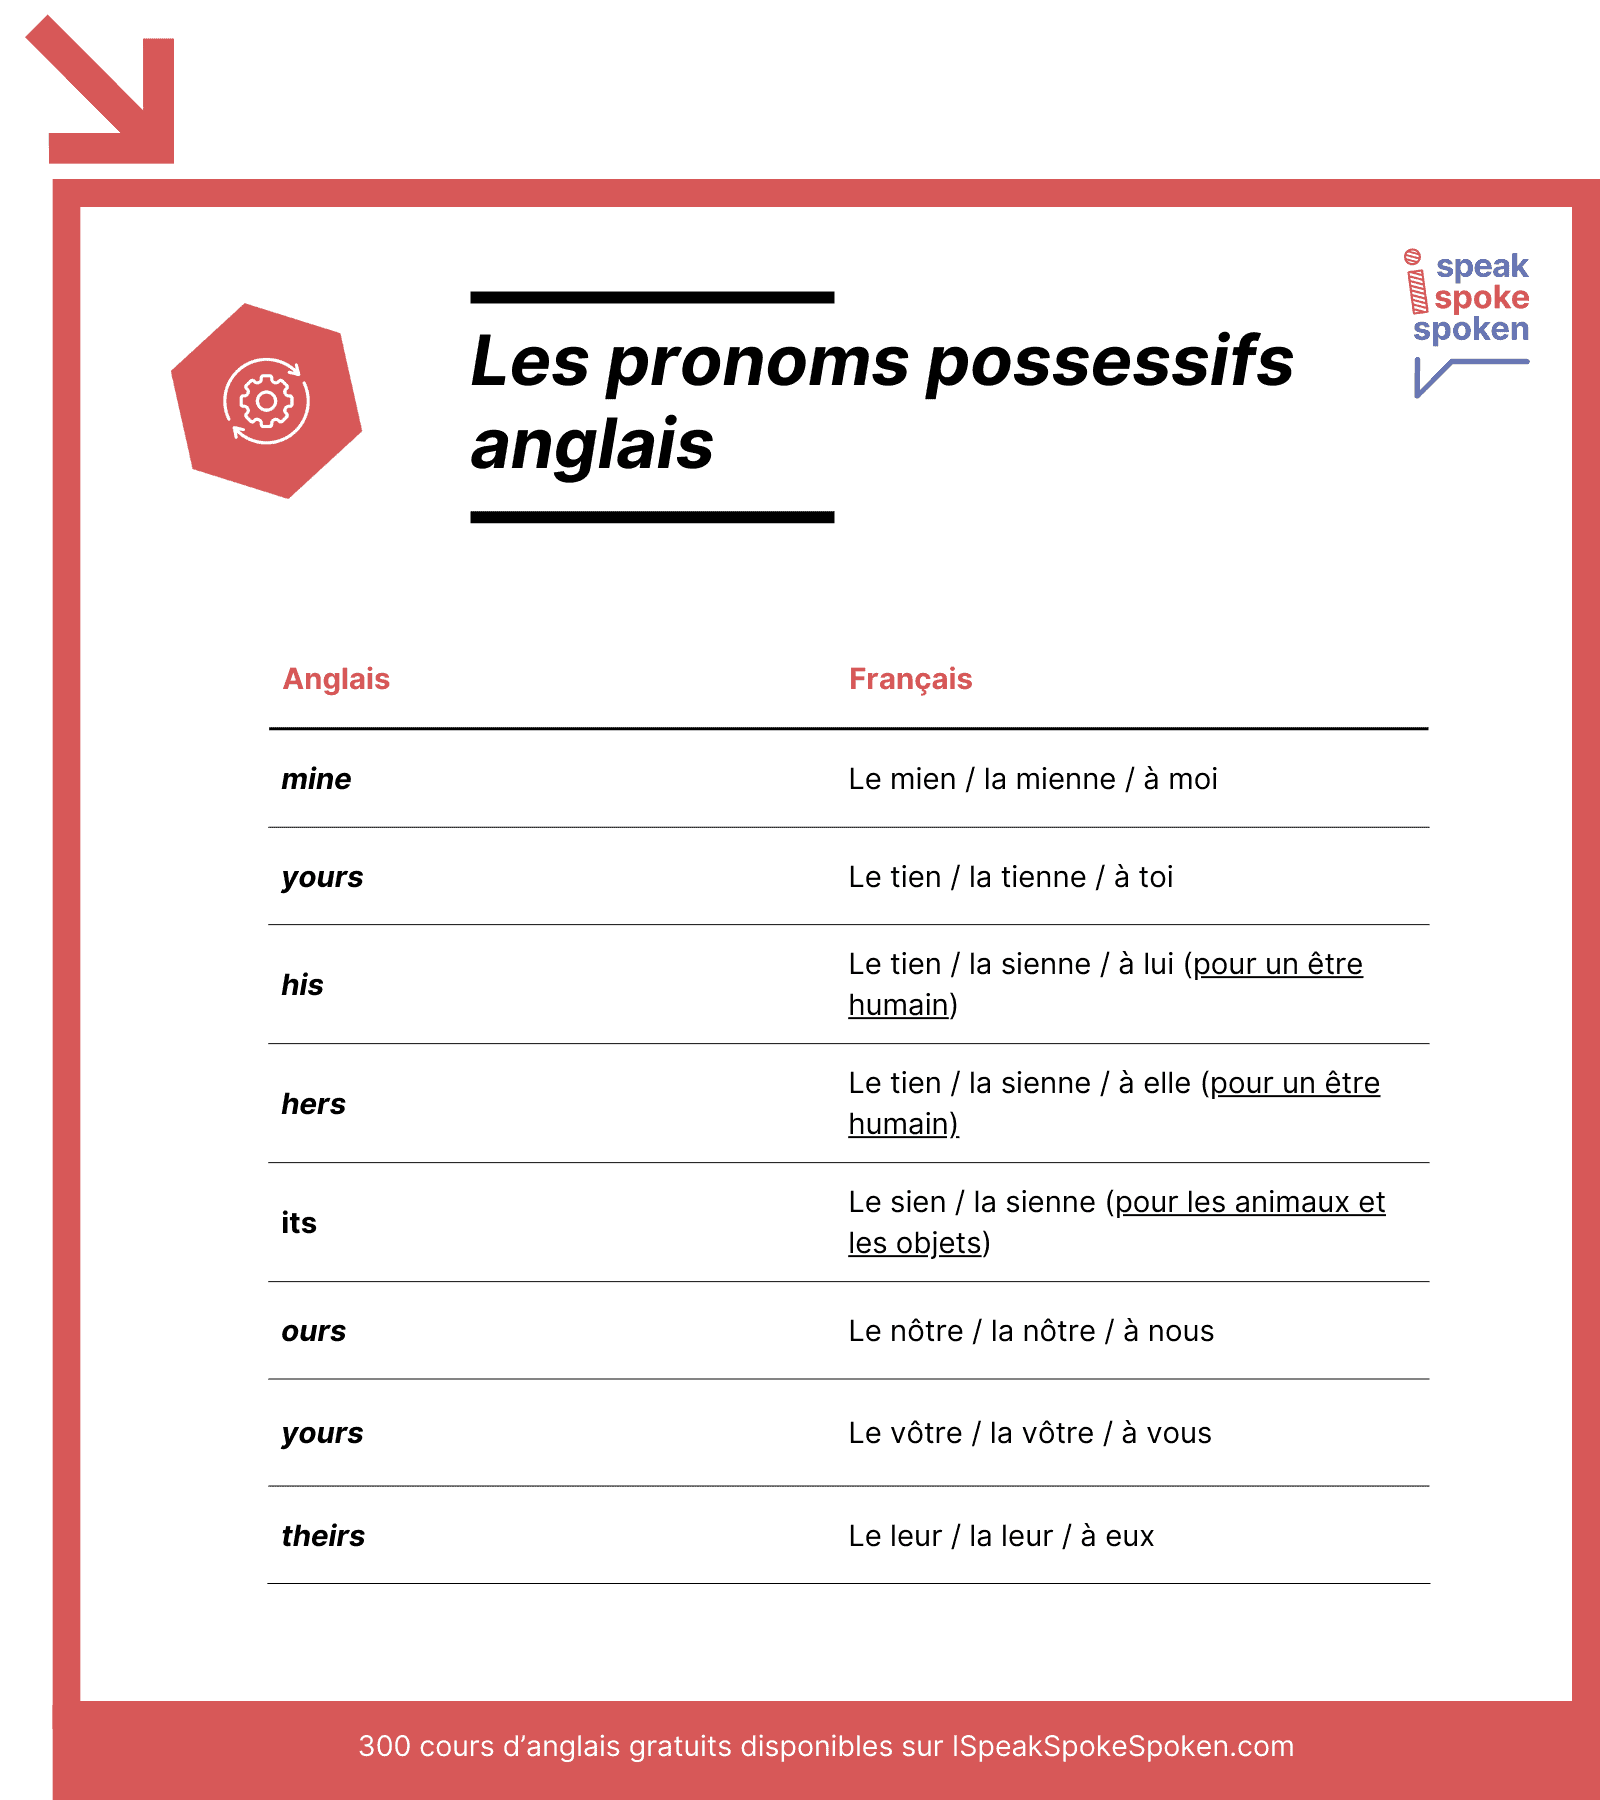 liste des pronoms possessifs anglais : mine, yours, his, hers, its, ours, yours, theirs